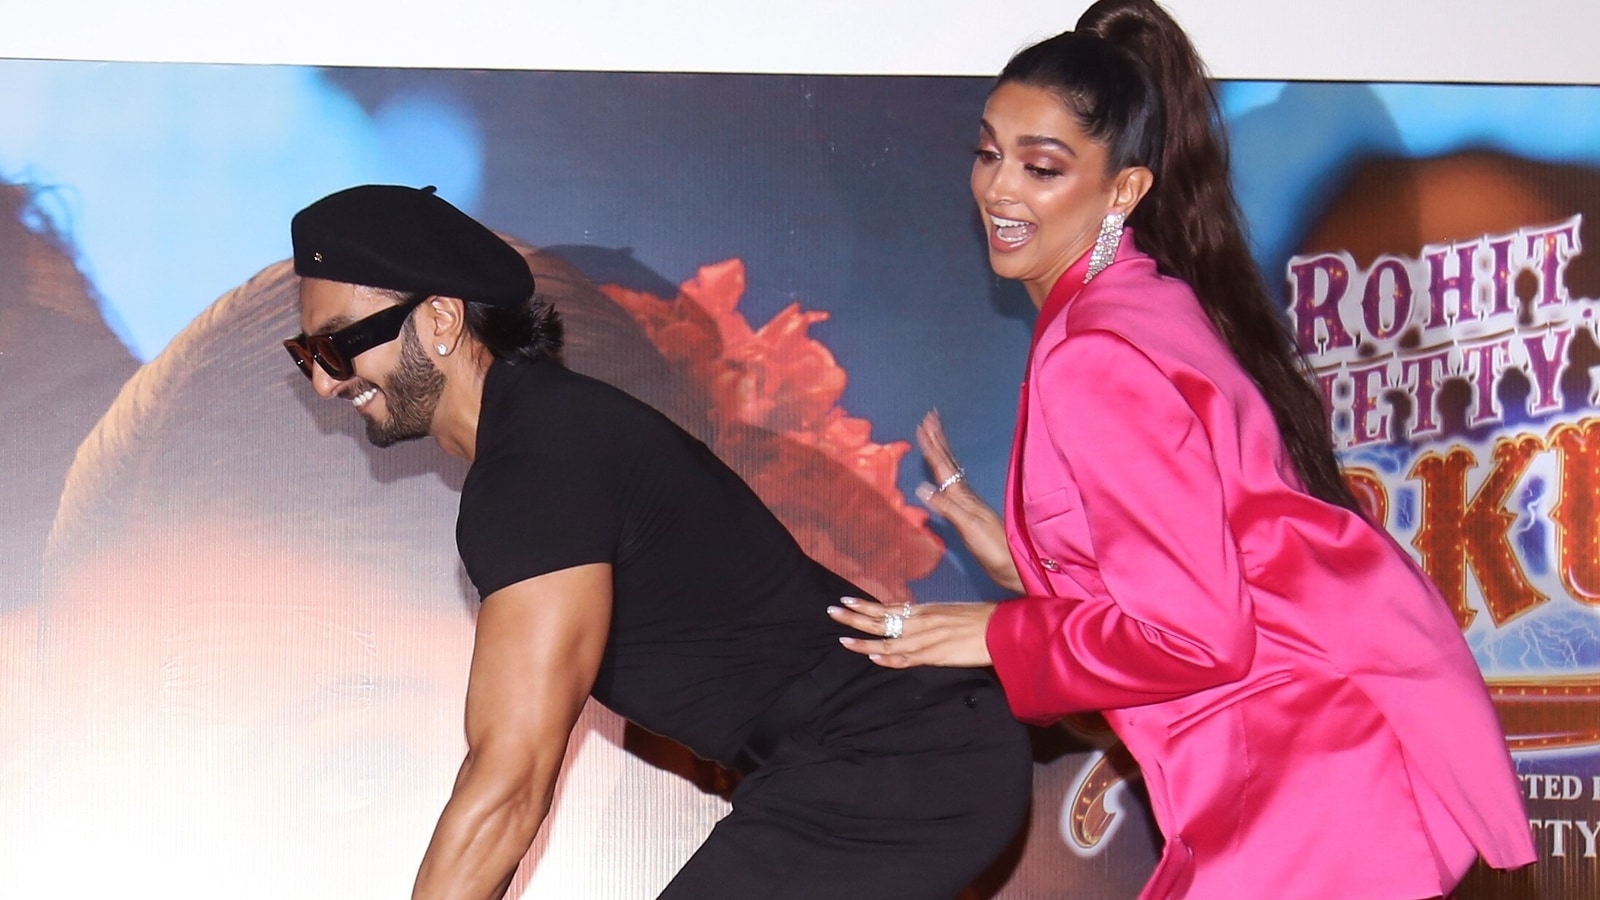 Depeeka Free X Video - Ranveer Singh leaves hilarious comments on Deepika's latest live video |  Bollywood - Hindustan Times